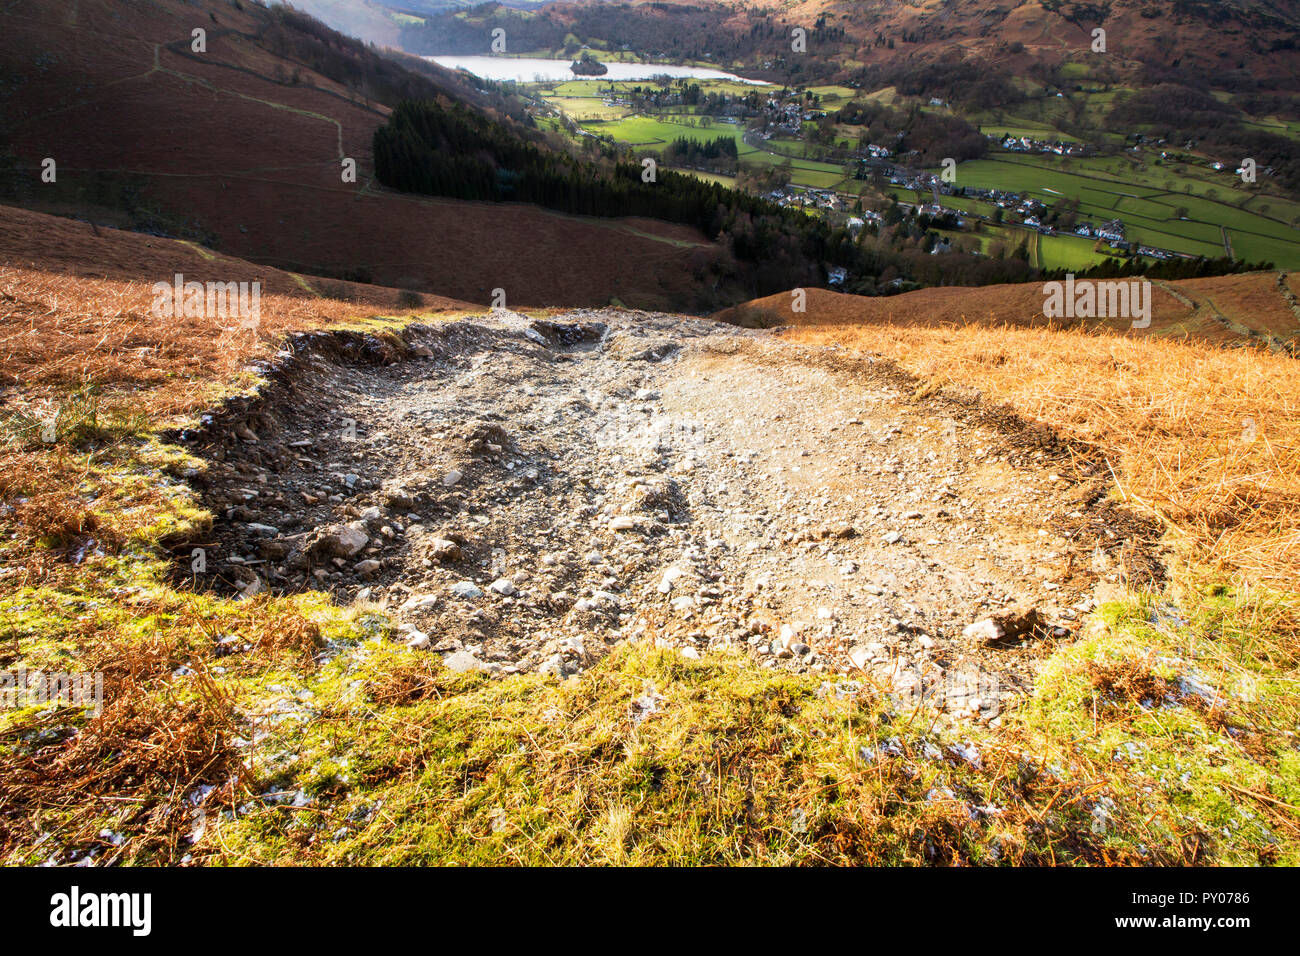 Storm Desmond wreaked havoc across Cumbria with floods and destruction. The super saturated ground failed in many places leaving landslip scars on many of the fellsides, this one is on Stone Arthur above Grasmere, Lake District, UK. Stock Photo